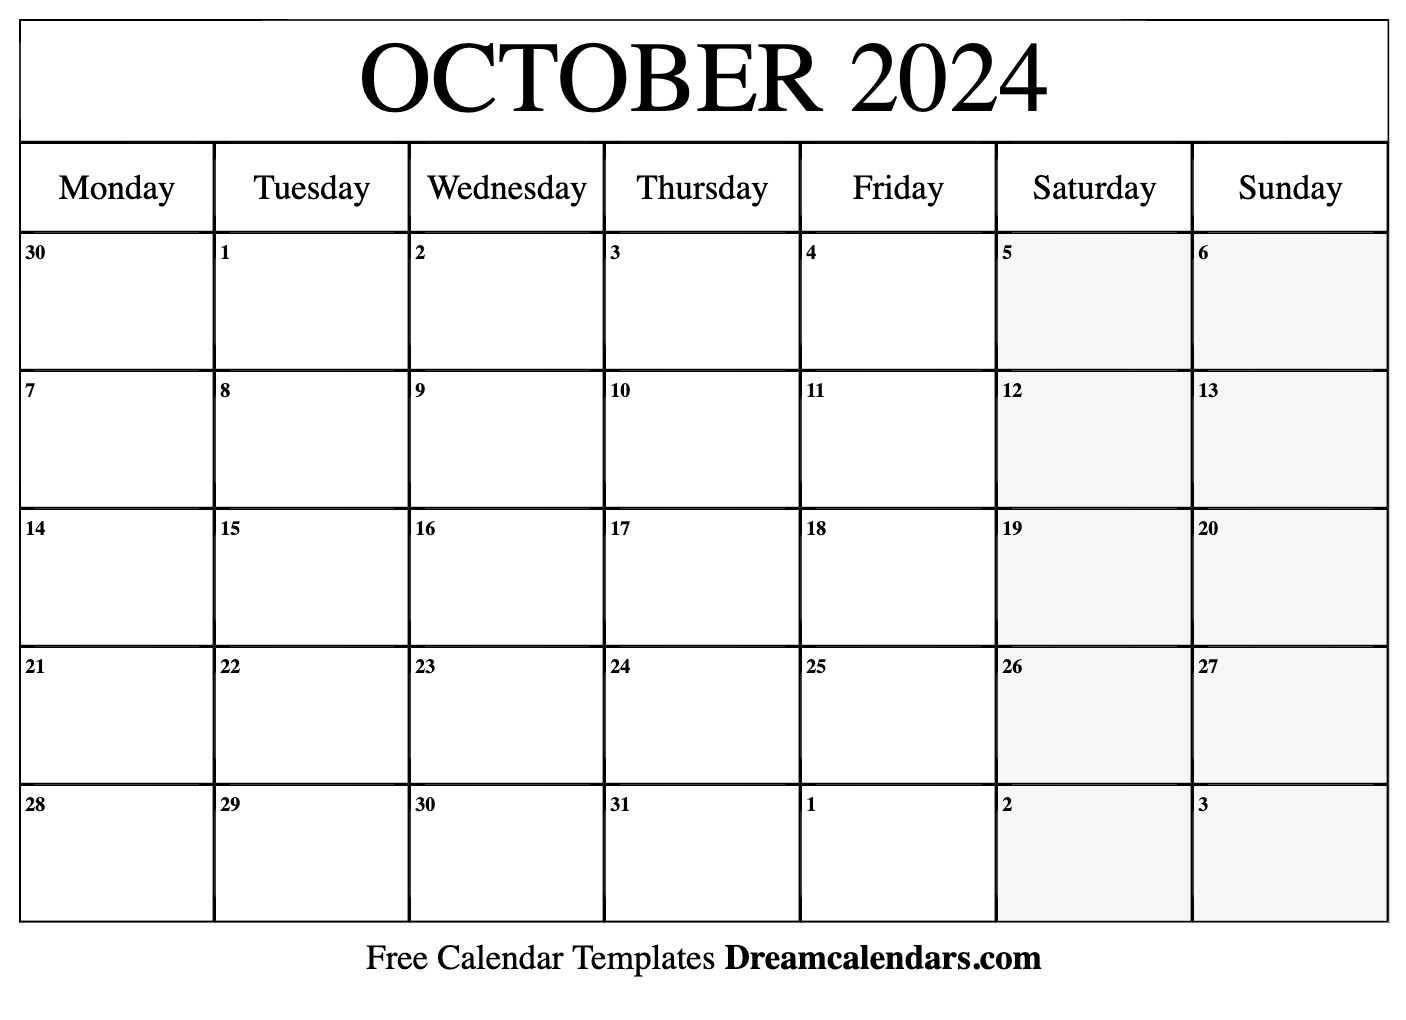 October 2024 Calendar | Free Blank Printable With Holidays for October 2024 Calendar Free Printable